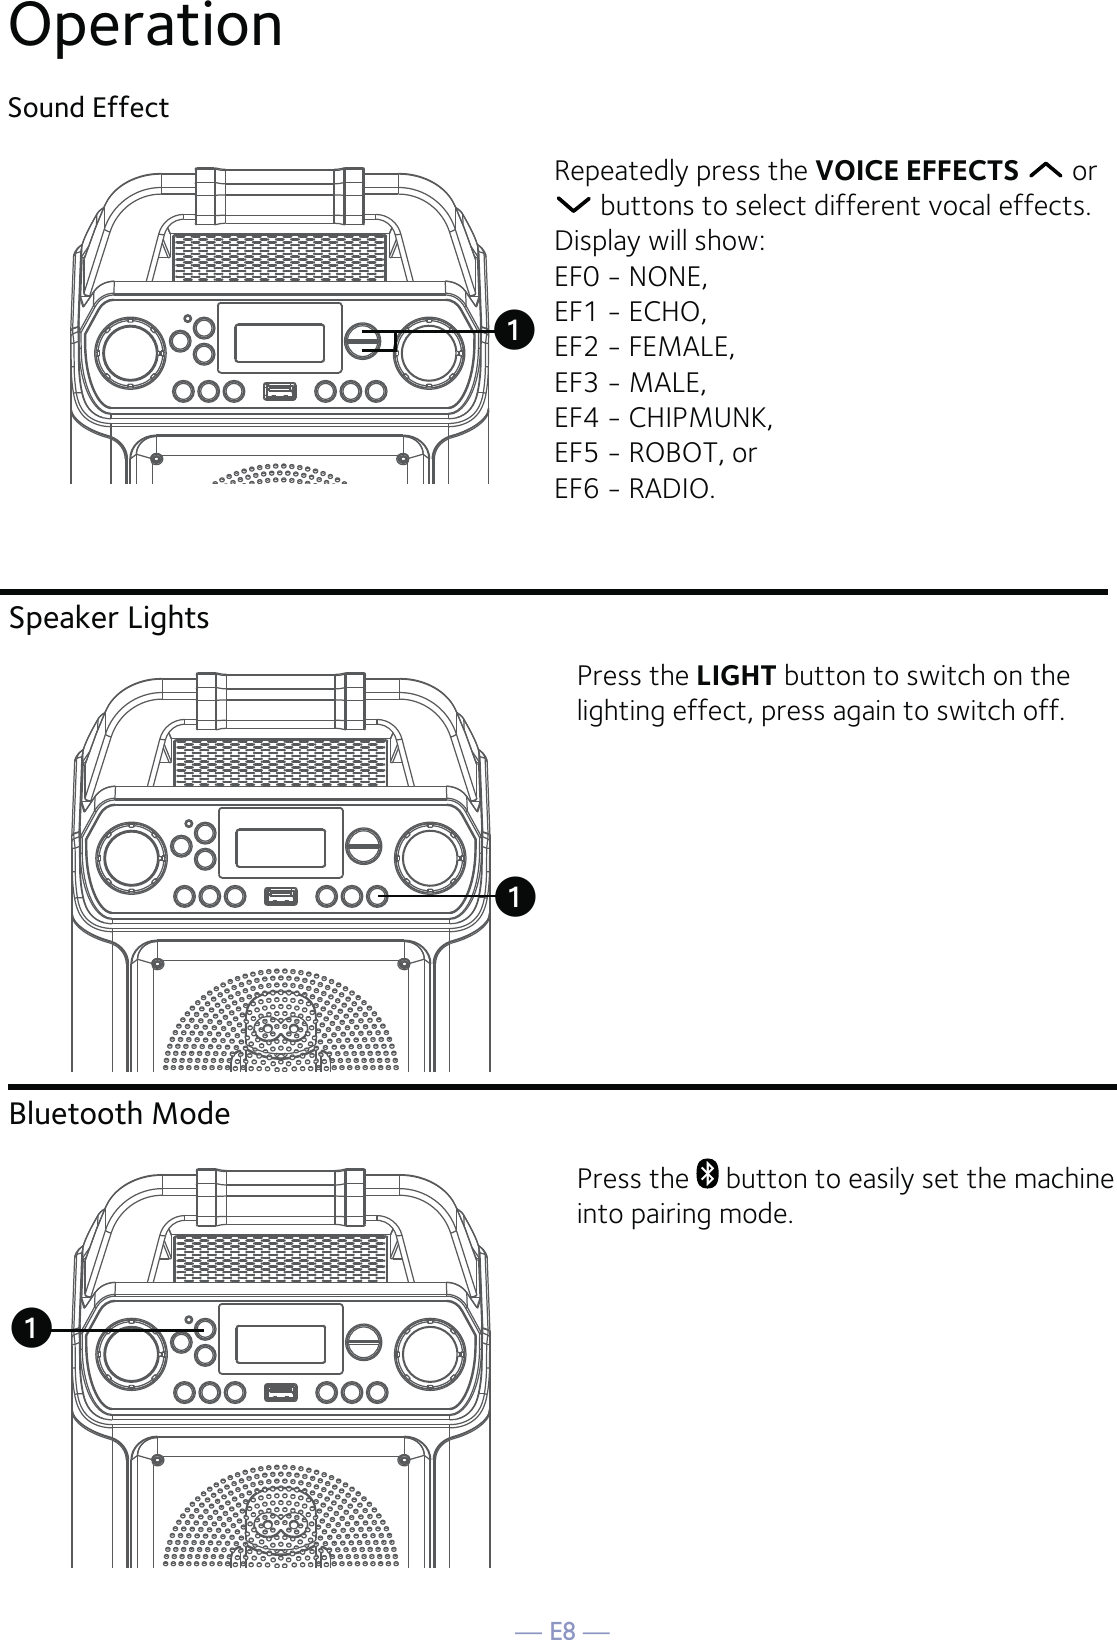 — E8 —OperationSound EffectRepeatedly press the VOICE EFFECTS  or  buttons to select different vocal effects. Display will show: EF0 - NONE, EF1 - ECHO, EF2 - FEMALE, EF3 - MALE, EF4 - CHIPMUNK, EF5 - ROBOT, or EF6 - RADIO.  uSpeaker LightsBluetooth ModePress the LIGHT button to switch on the lighting effect, press again to switch off.Press the   button to easily set the machine into pairing mode.uu